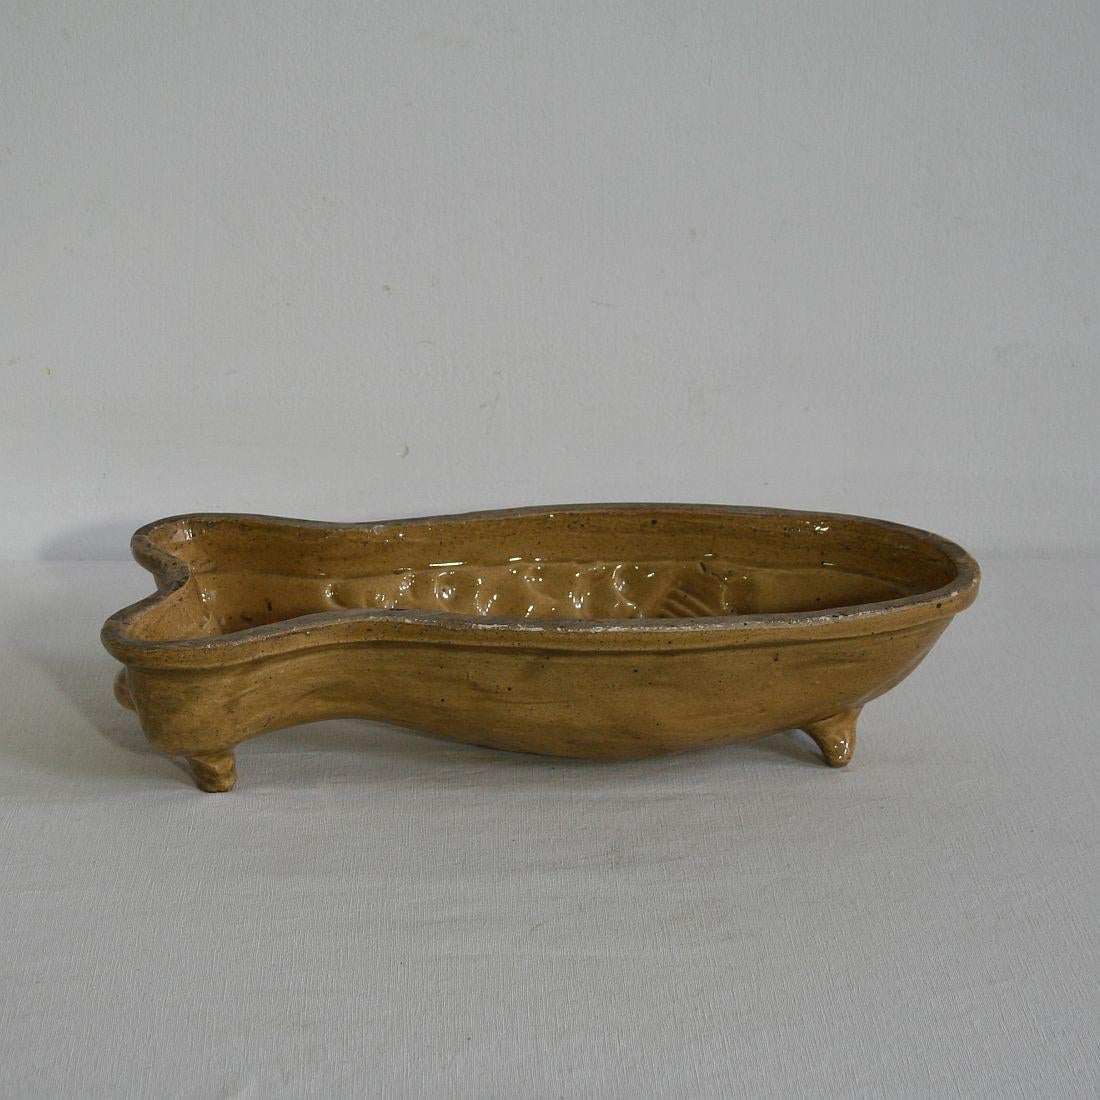 Hand-Crafted Collection of 19th Century, French Earthenware Fish Baking Molds